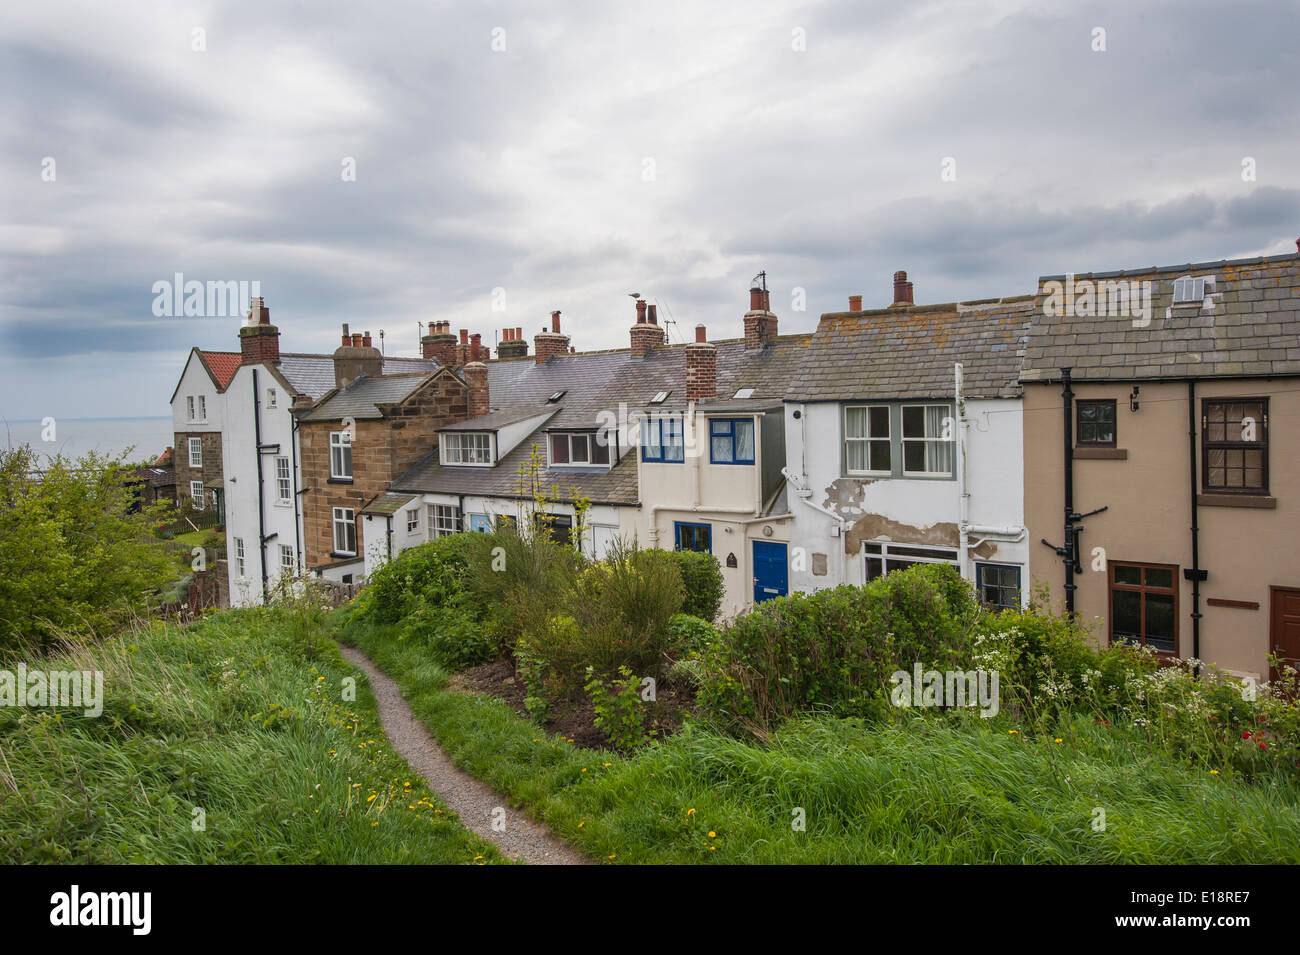 Row of terraced houses on coast in english rural countryside with overcast sky Stock Photo